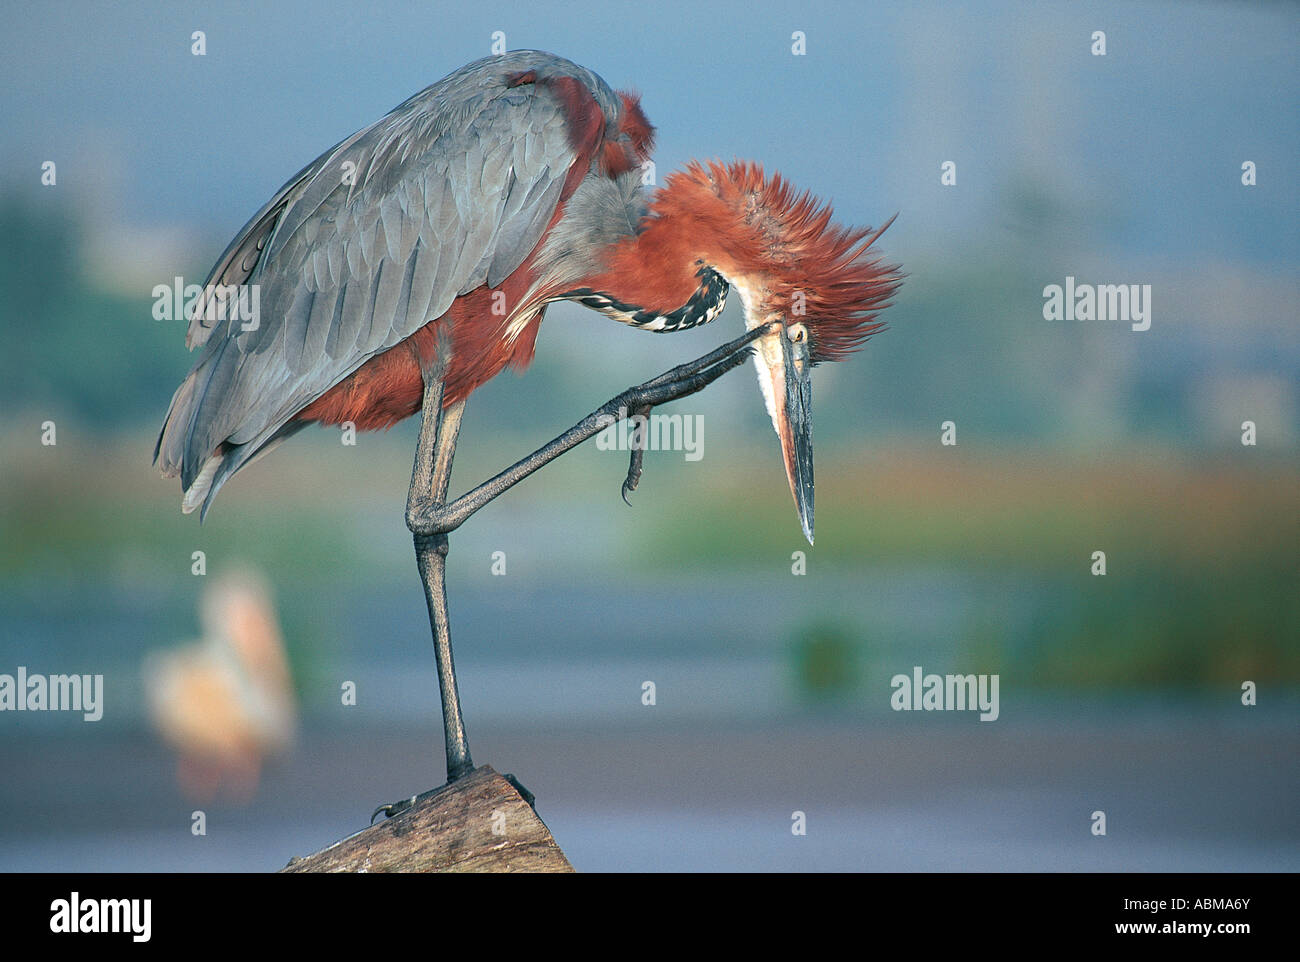 Goliath Heron perched on a stump and scratching itself Umgeni River mouth Durban South Africa Stock Photo